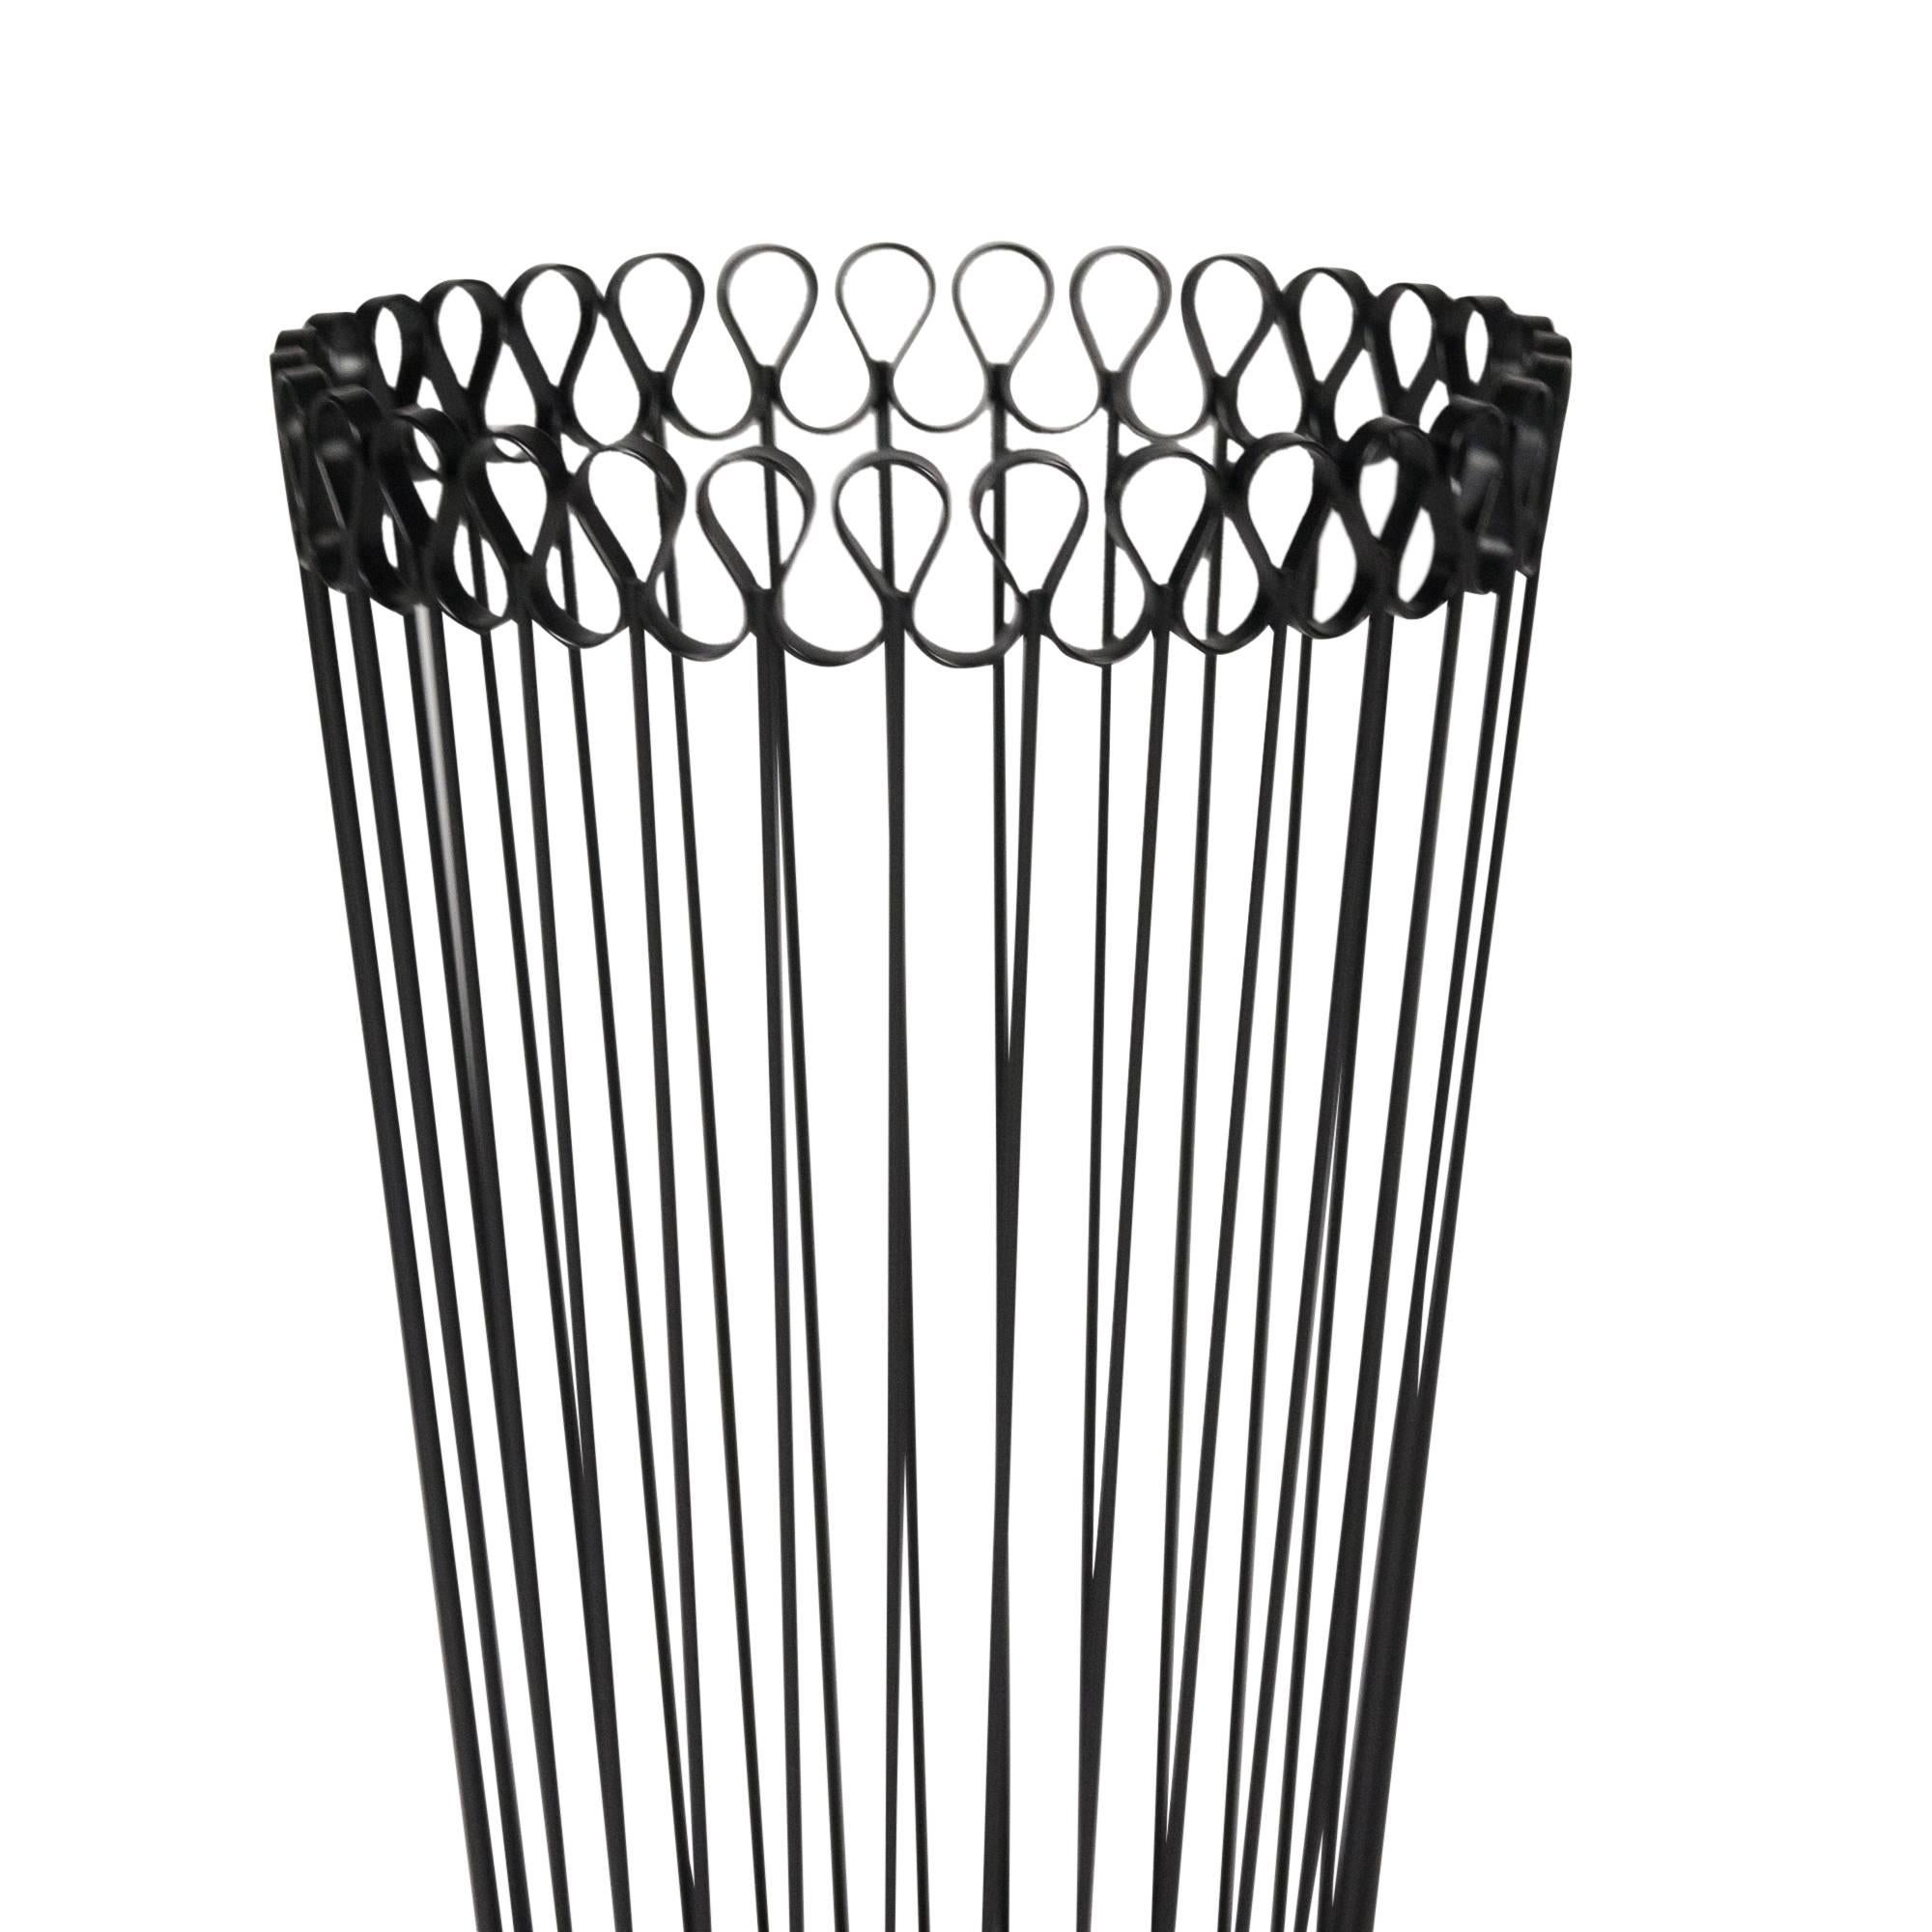 Circular iron waste basket, with scalloped rim, the sides formed by thin iron rods, Austria, 1950s. Measures: Height 16 in, top diameter 9 1/2 in, bottom diameter 8 in.
 